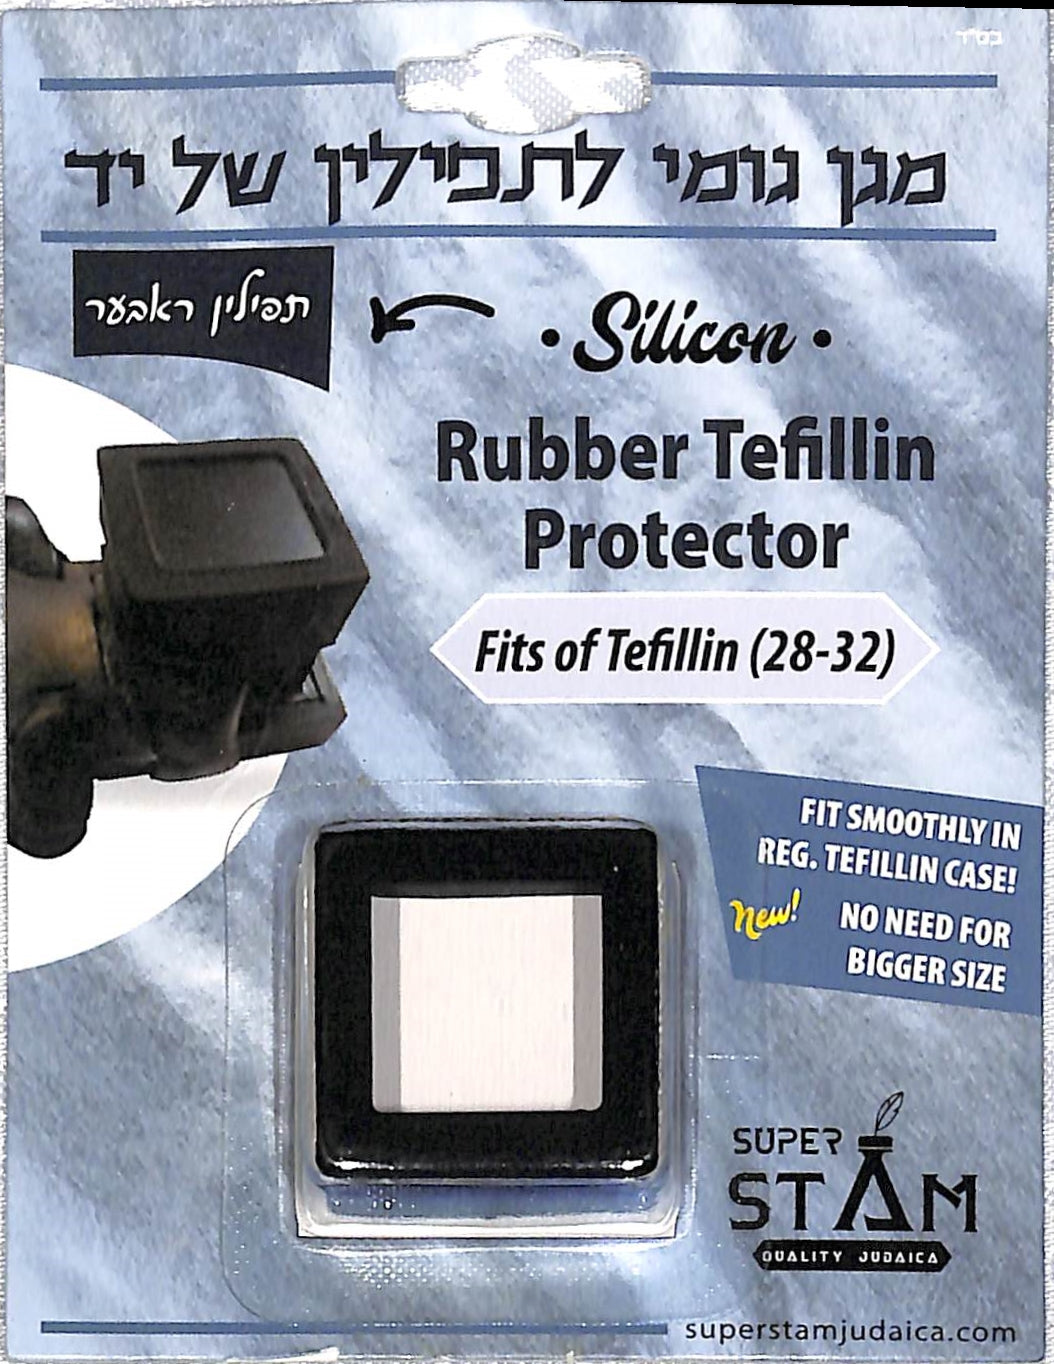 NEW Tefillin Protector Rubber Flexible Protective Cover for Tefillin Shel Yad from Being Damaged  NEW fits smoothly in regular tefillin case no need for bigger size case